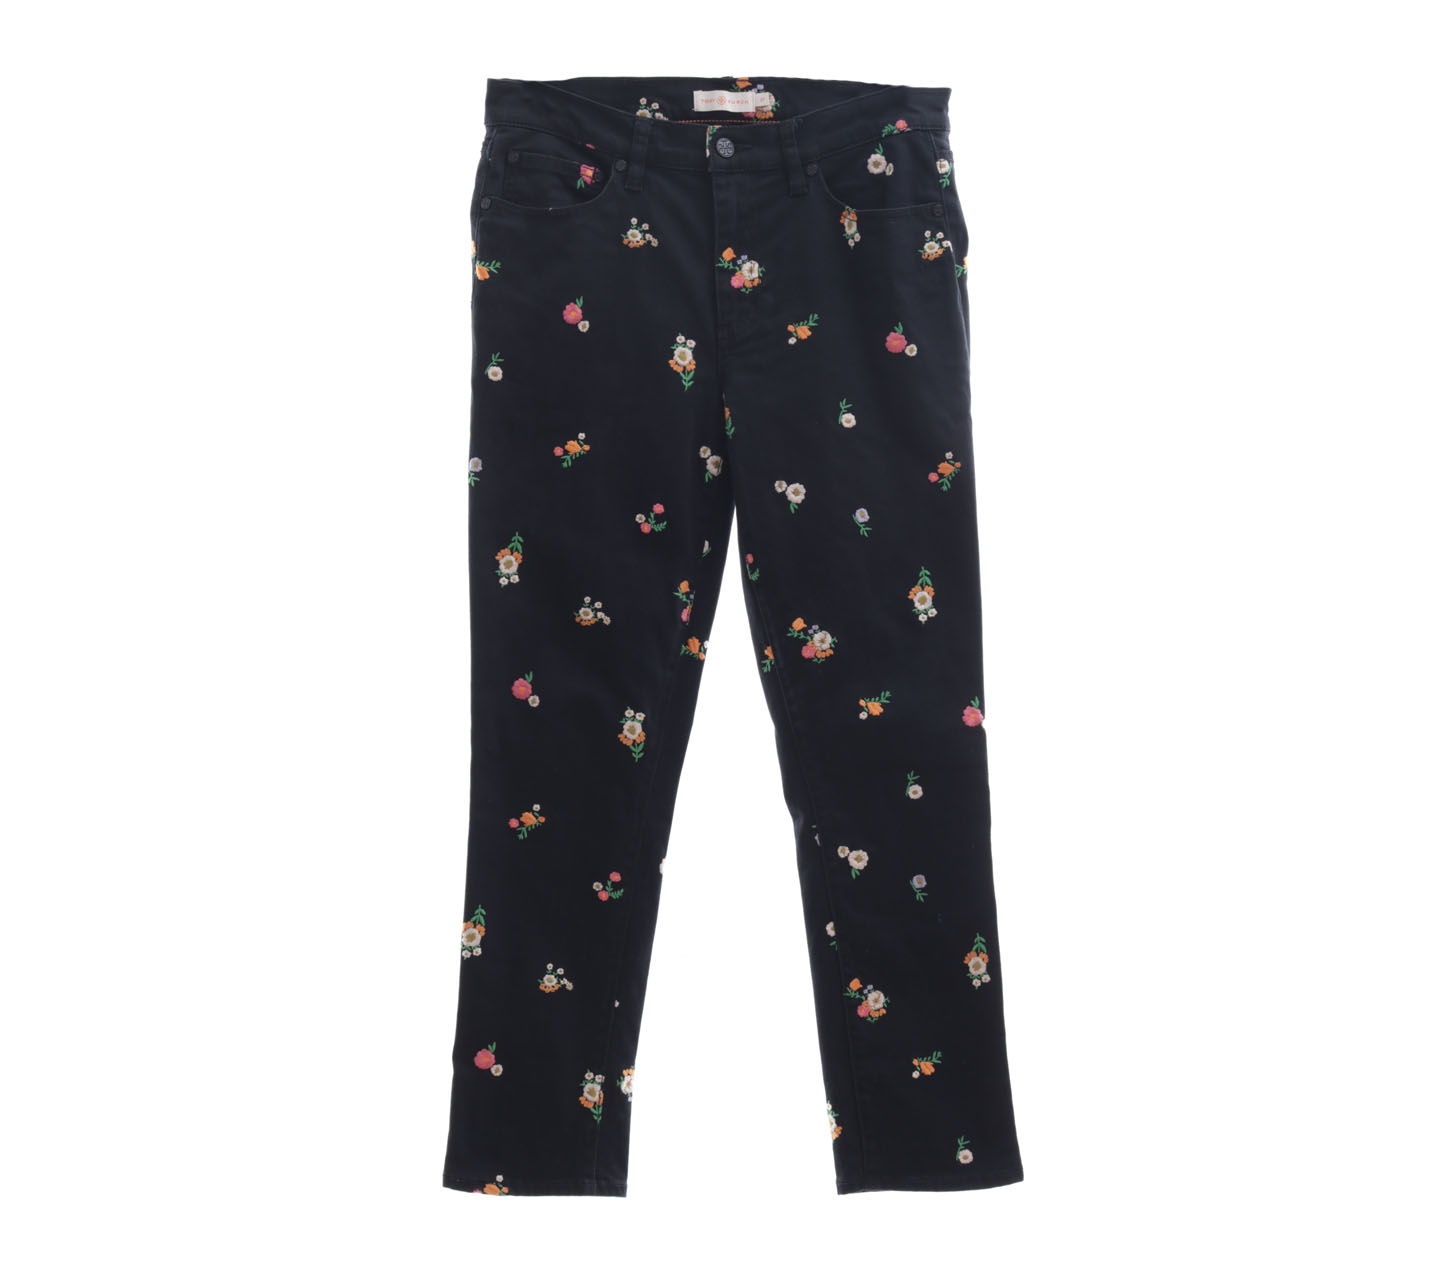  Tory burch Black Embroidery Floral Long Pants